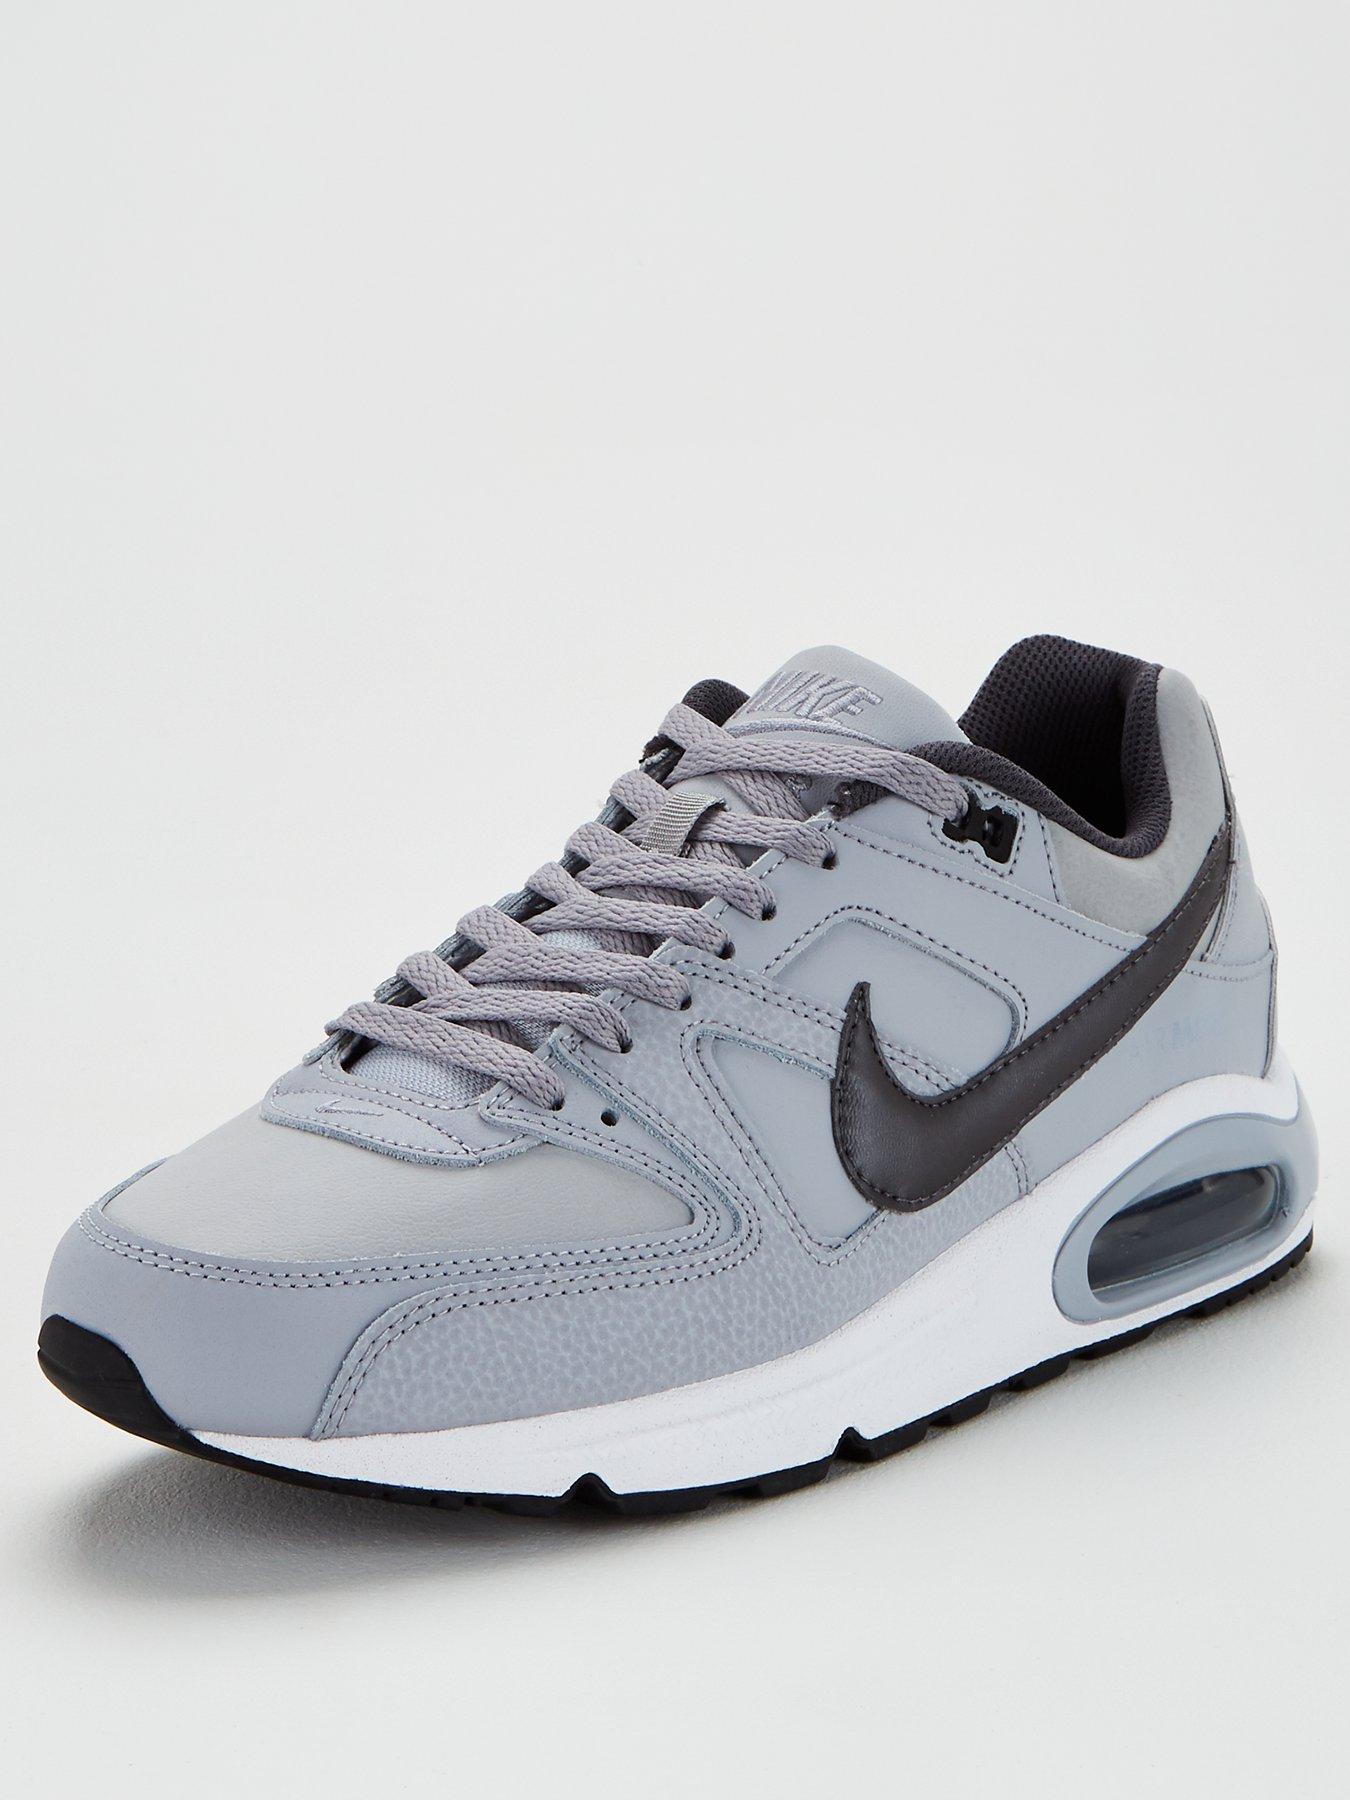 Nike Air Max Command Leather - Grey/Black | very.co.uk